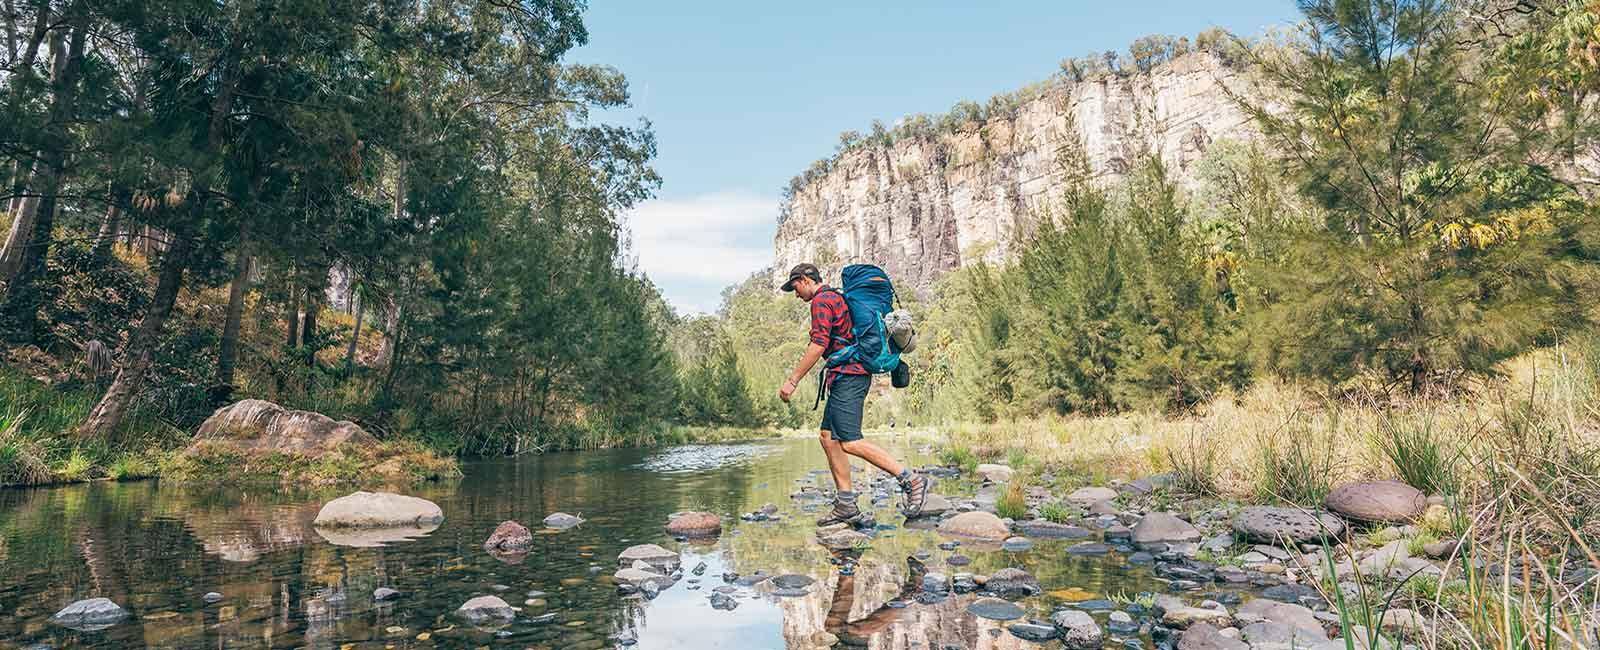 Walking Carnarvon Gorge | Roaming Roma: Four of the best day trips from Roma